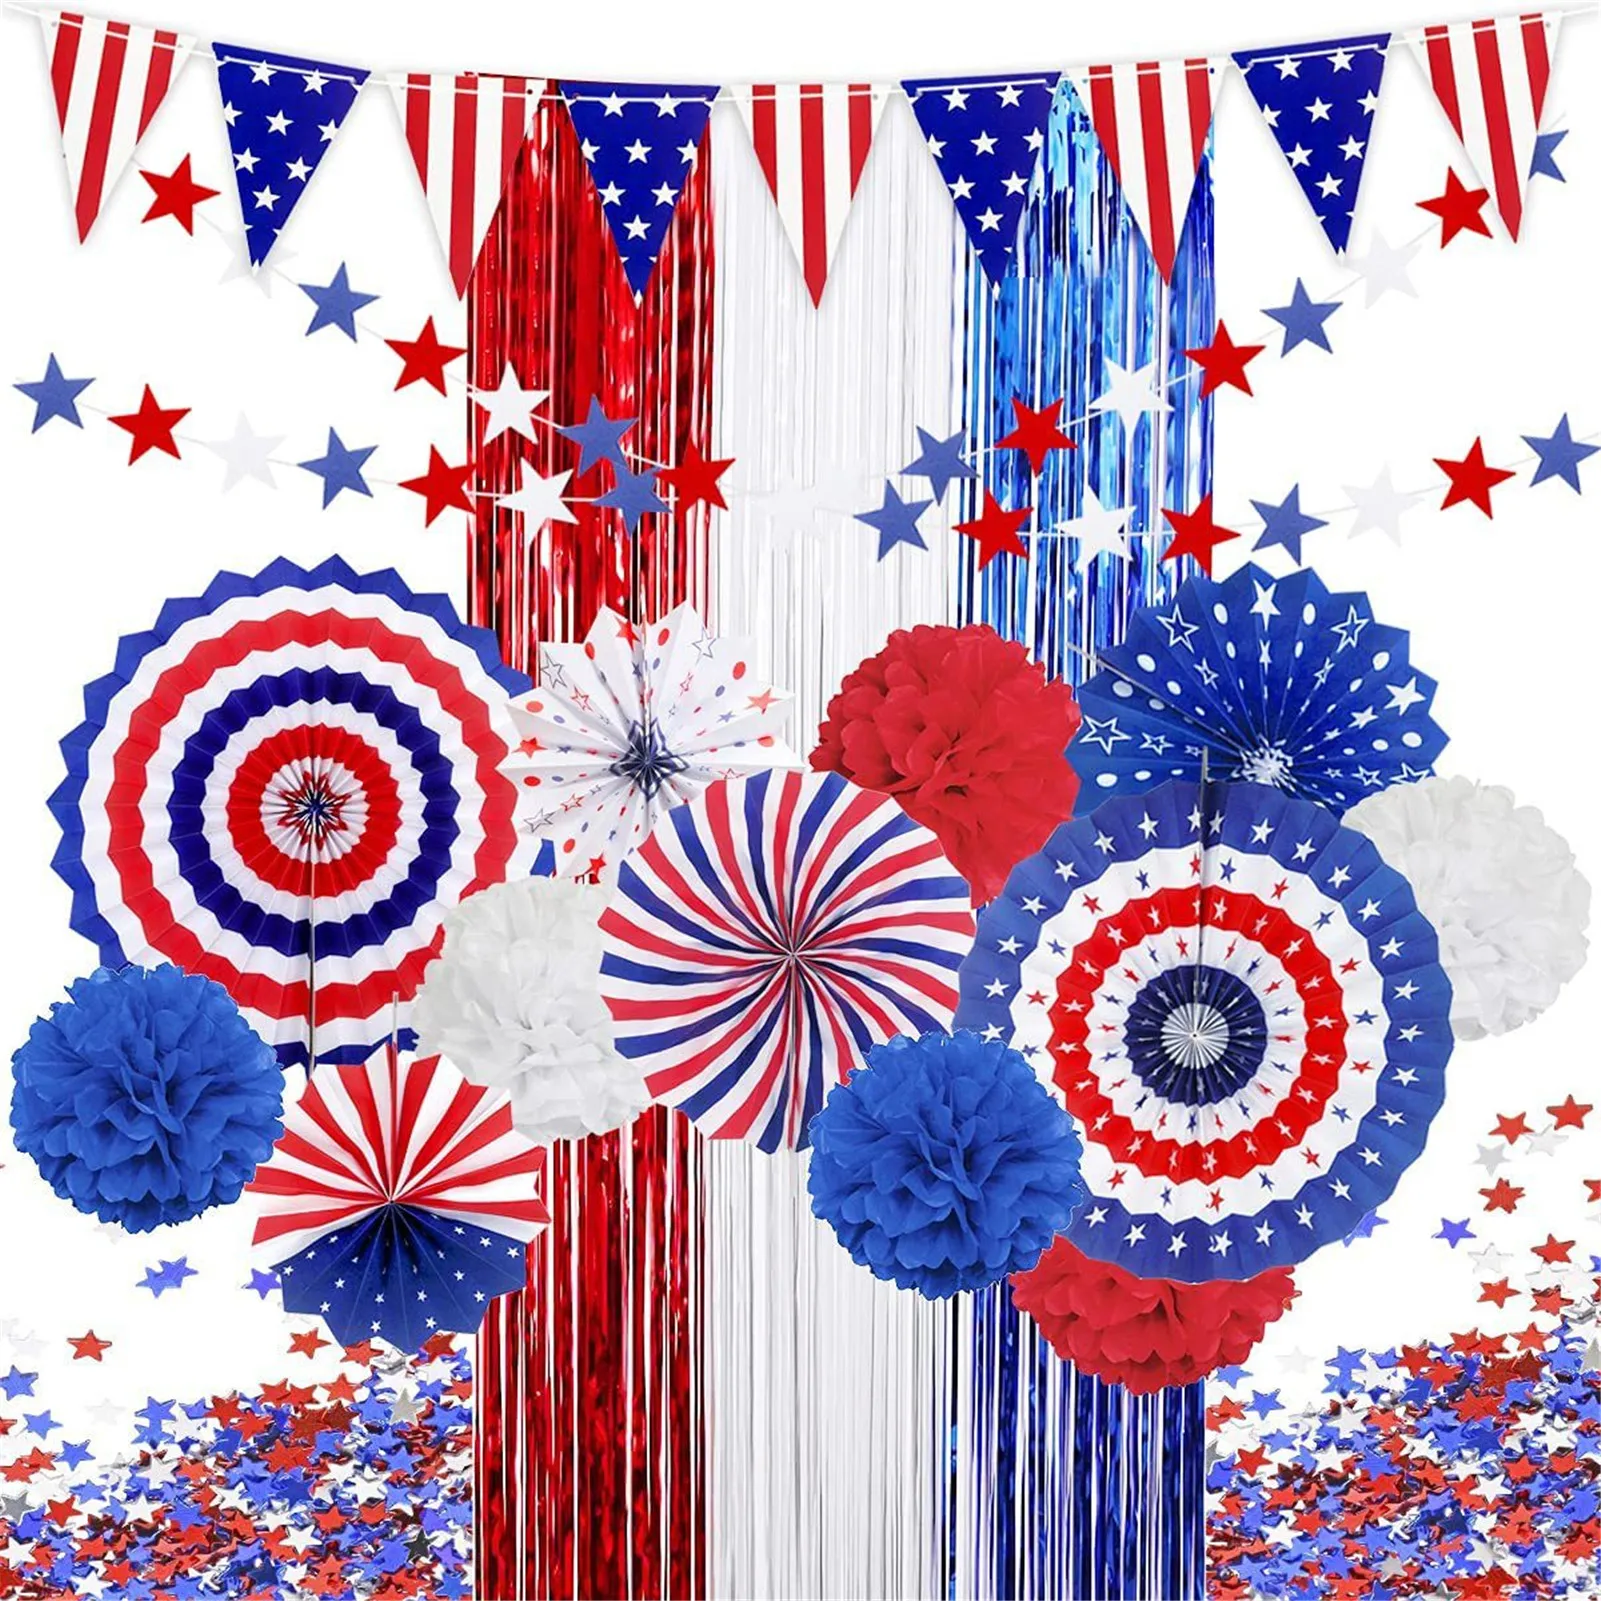 American Flag Paper Fans Patriotic Decoration Set Star Pull Flower Curtain for 4th Of July American National Day Party Decor